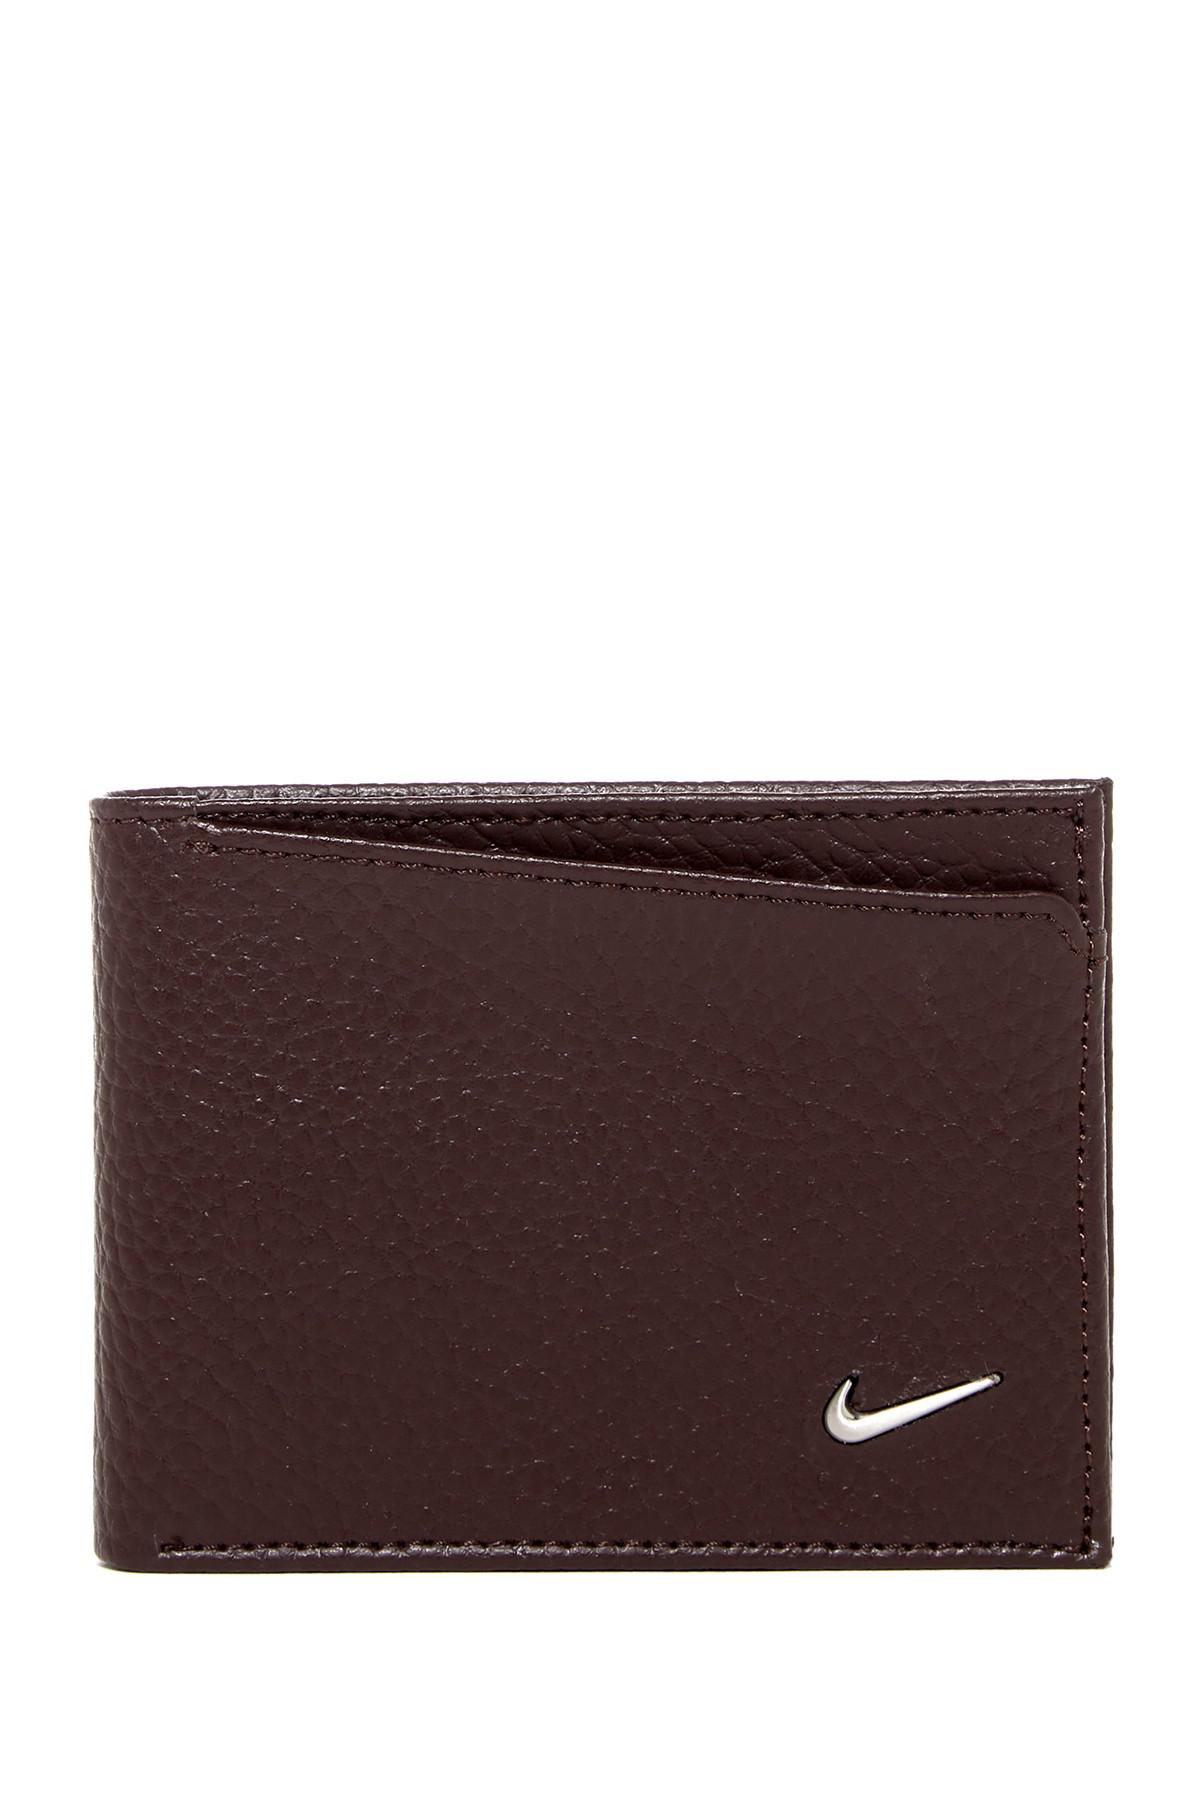 Nike Leather Passcase Wallet in Brown for Men - Lyst